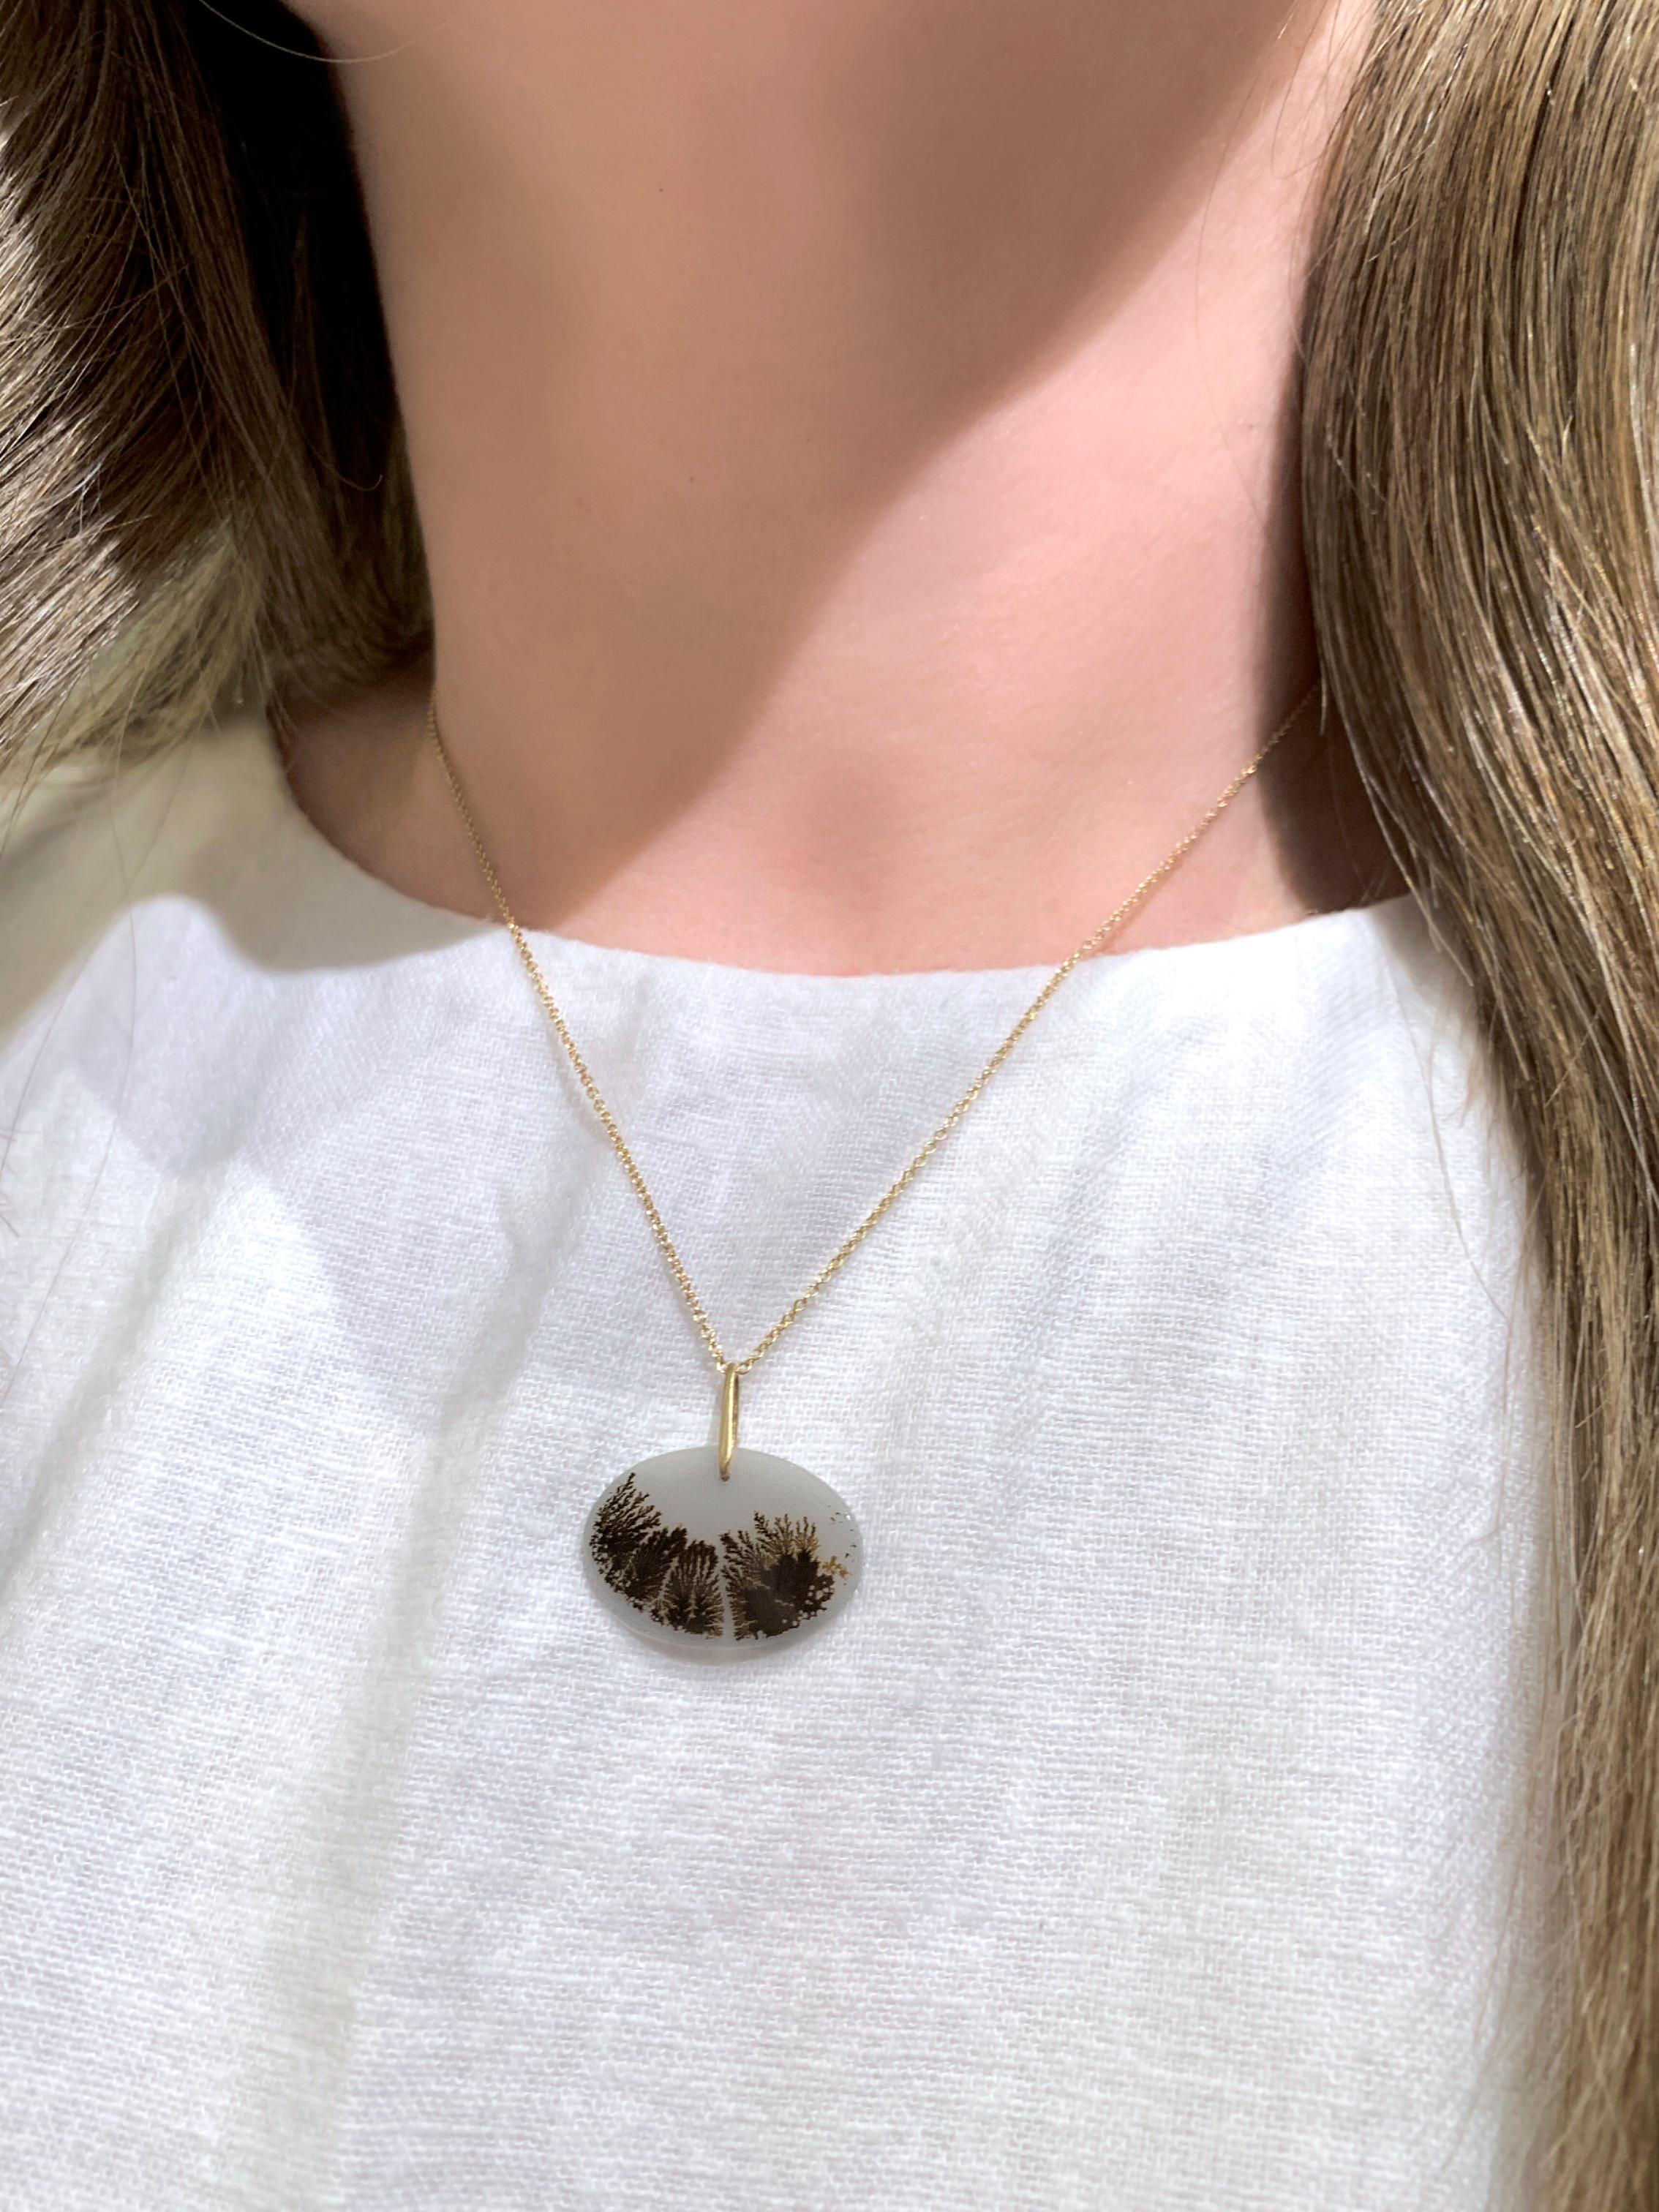 One of a Kind Necklace handmade by acclaimed jewelry designer Dana Kellin featuring a fantastic, completely natural oval dendritic agate gemstone attached to a handmade 14k yellow gold satin-finished bail and finished on a 17 inch 14k yellow gold